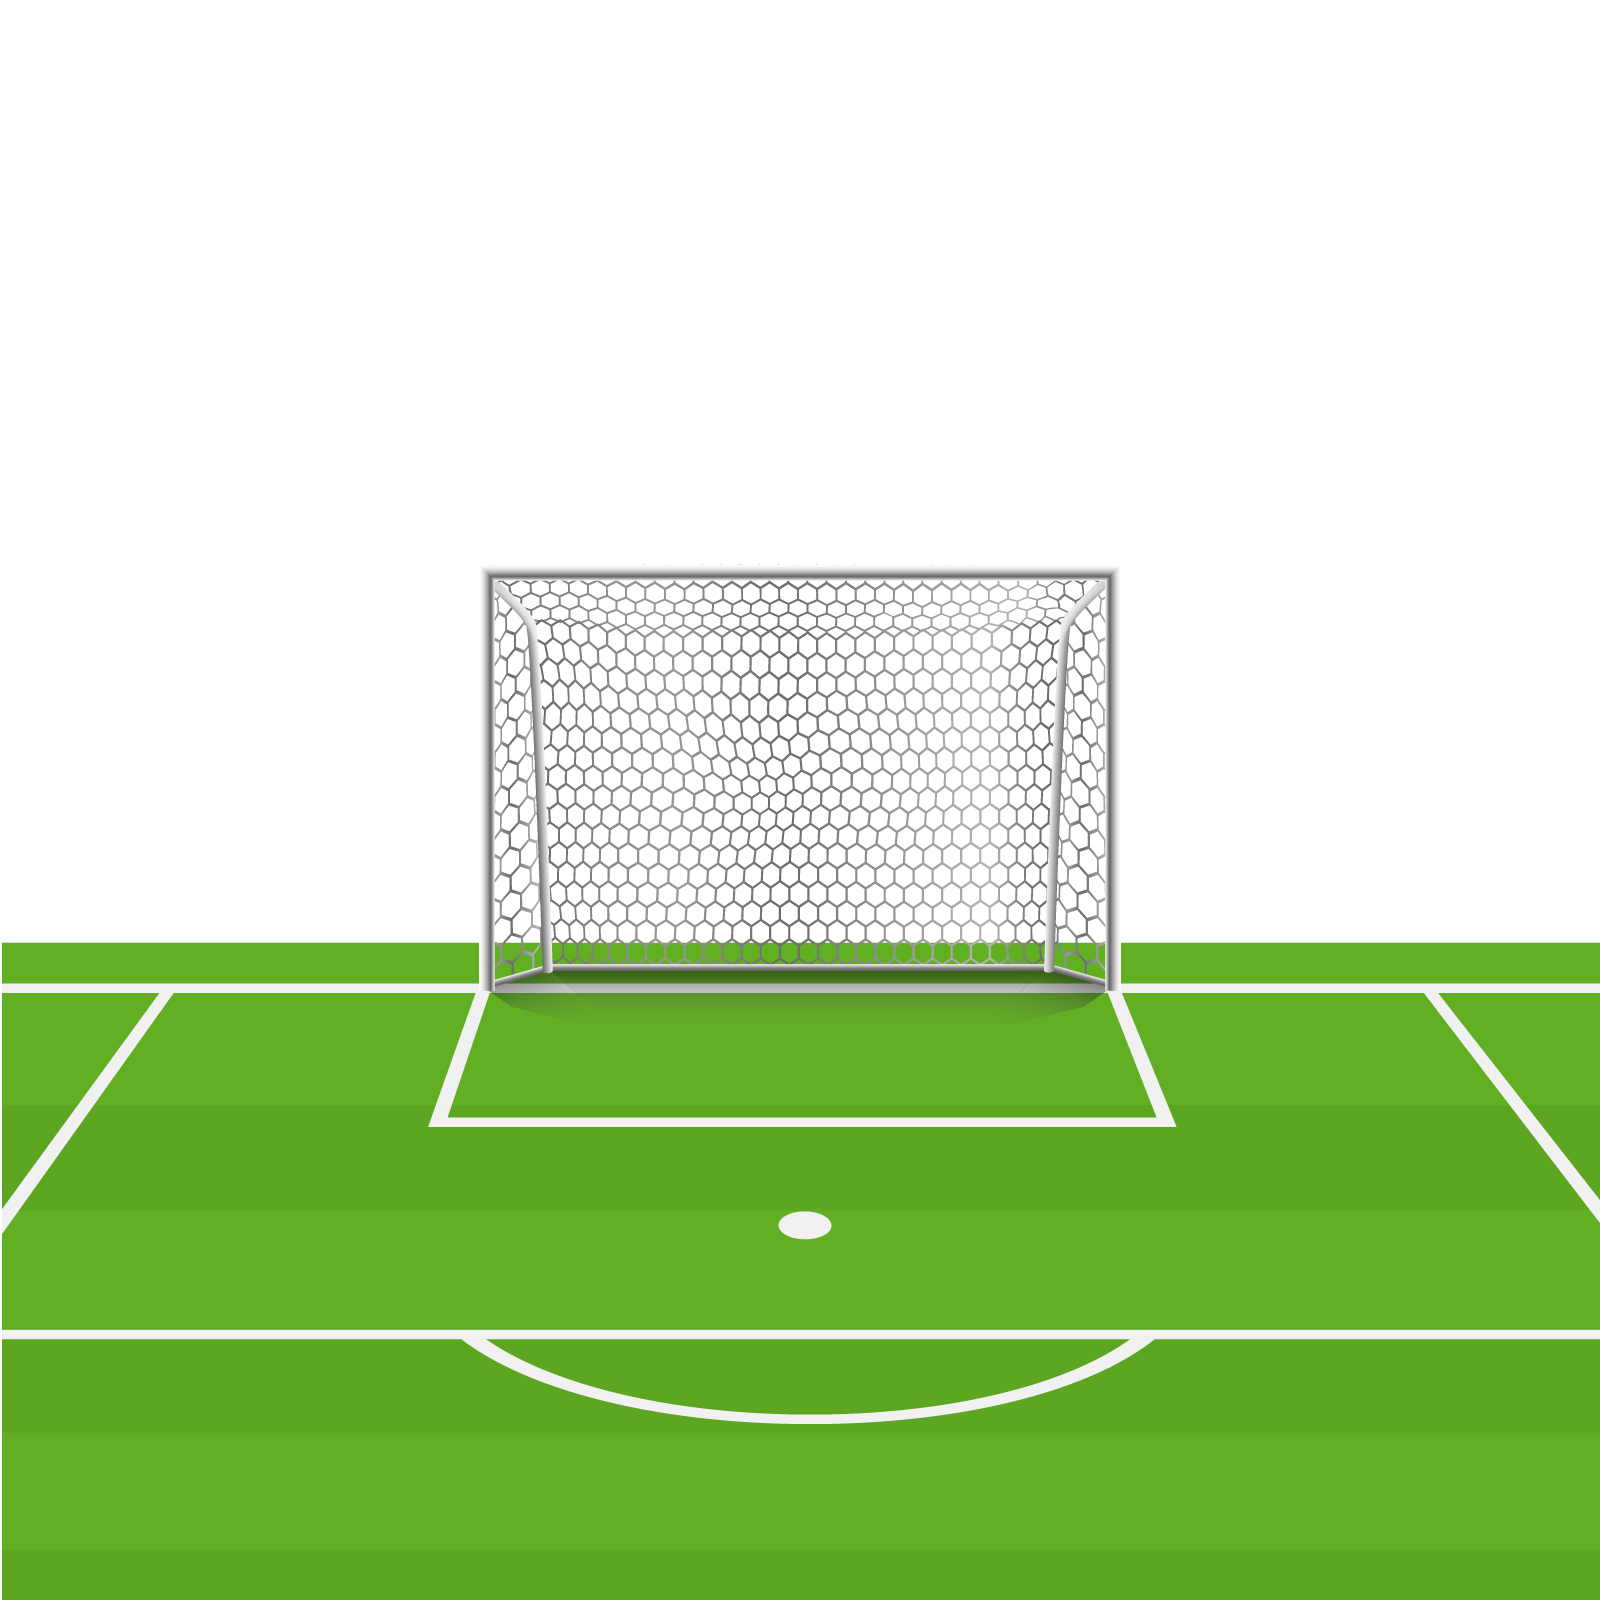 Goal PNG Image, Football Goal Clipart Picture Transparent PNG Logos